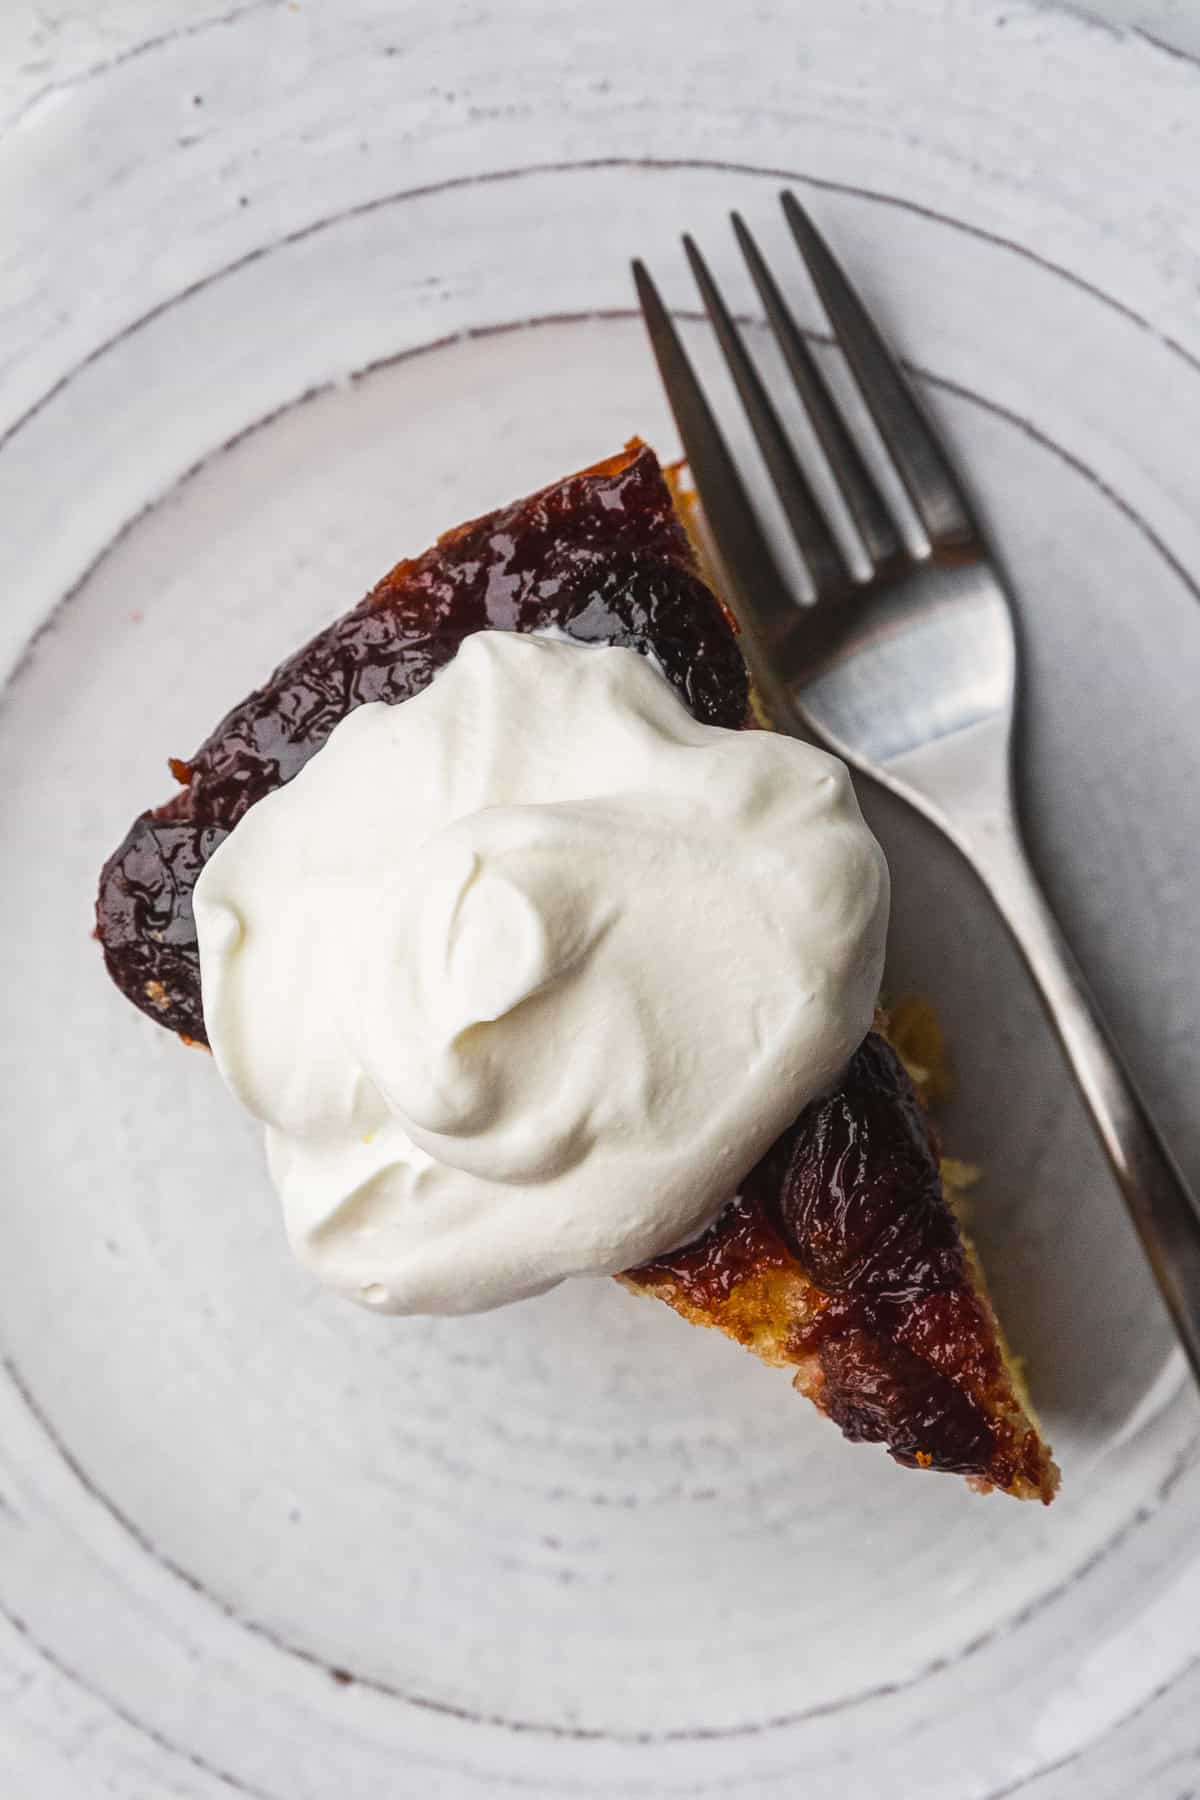 Whipped cream on top of  a slice of cherry upside down cake.